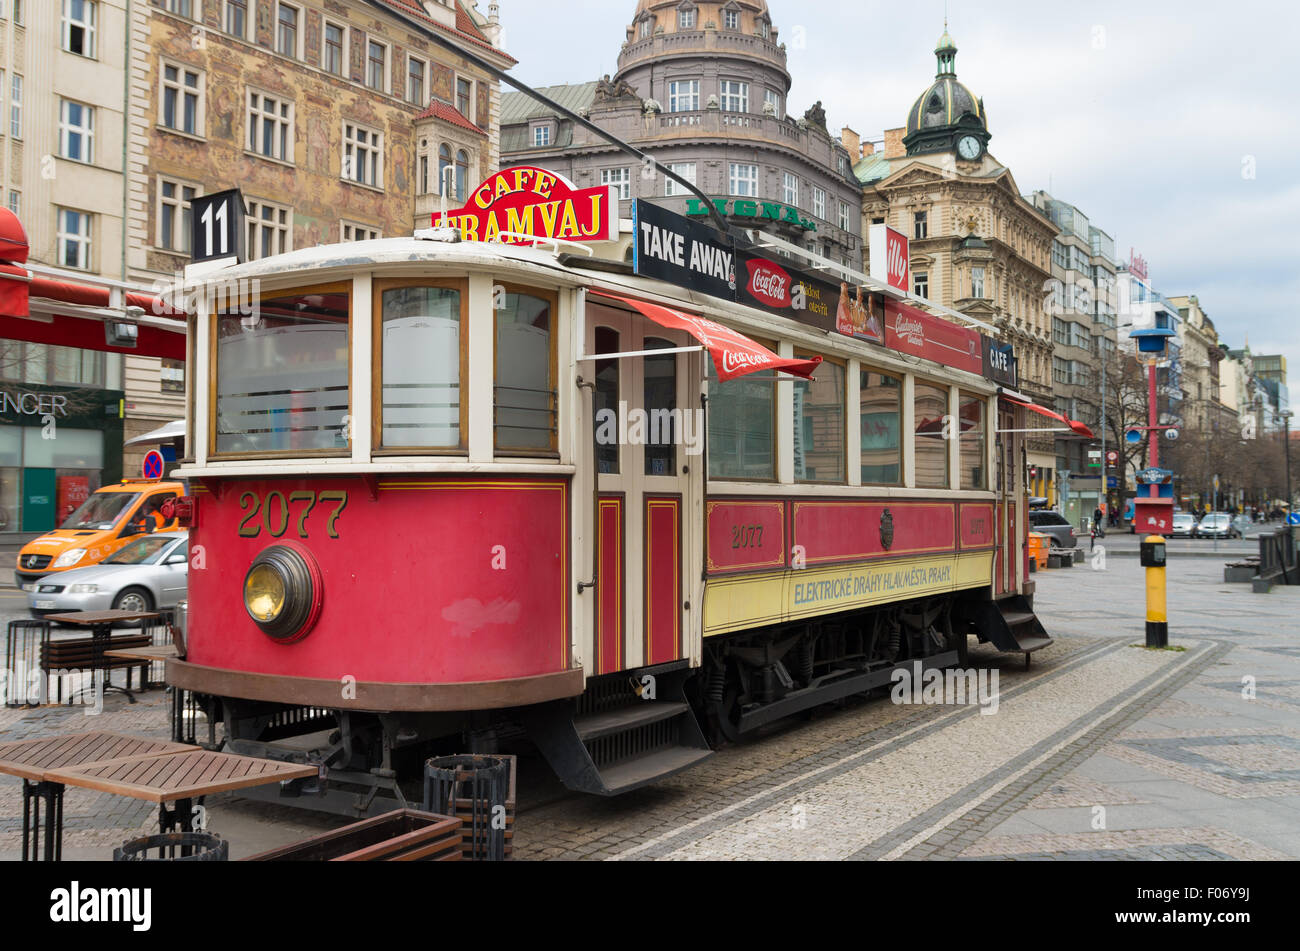 PRAGUE - DECEMBER 23, 2014: Cafe in the form of an old tram on the Wenceslas square. The square is named after Saint Wenceslas, Stock Photo